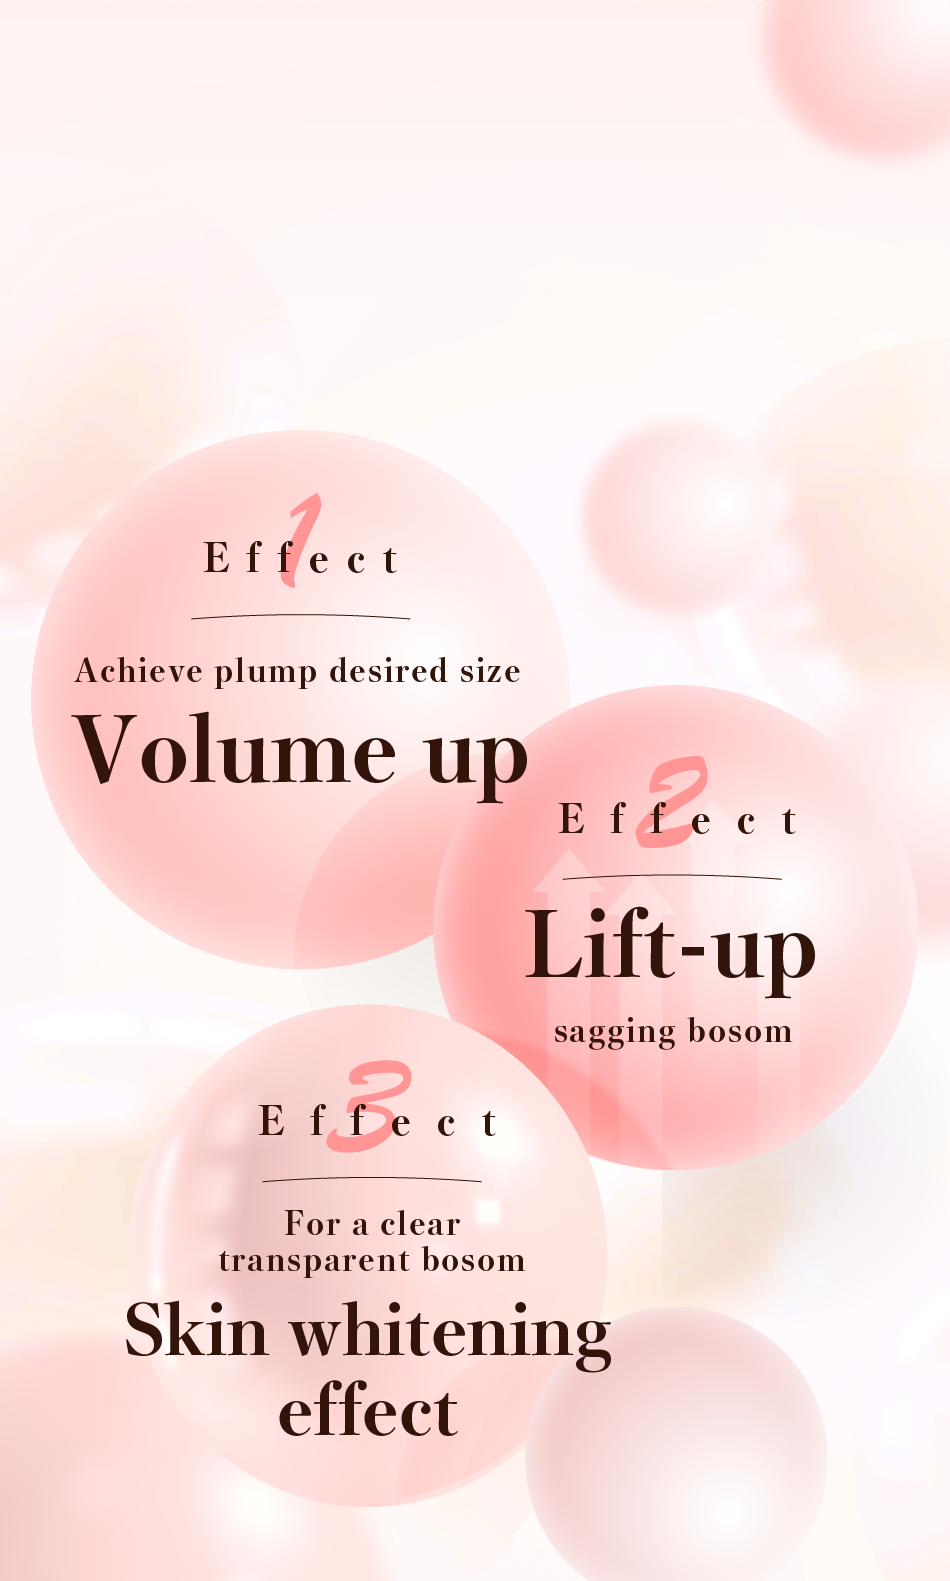 you can expect three types of bosom enhancing effects